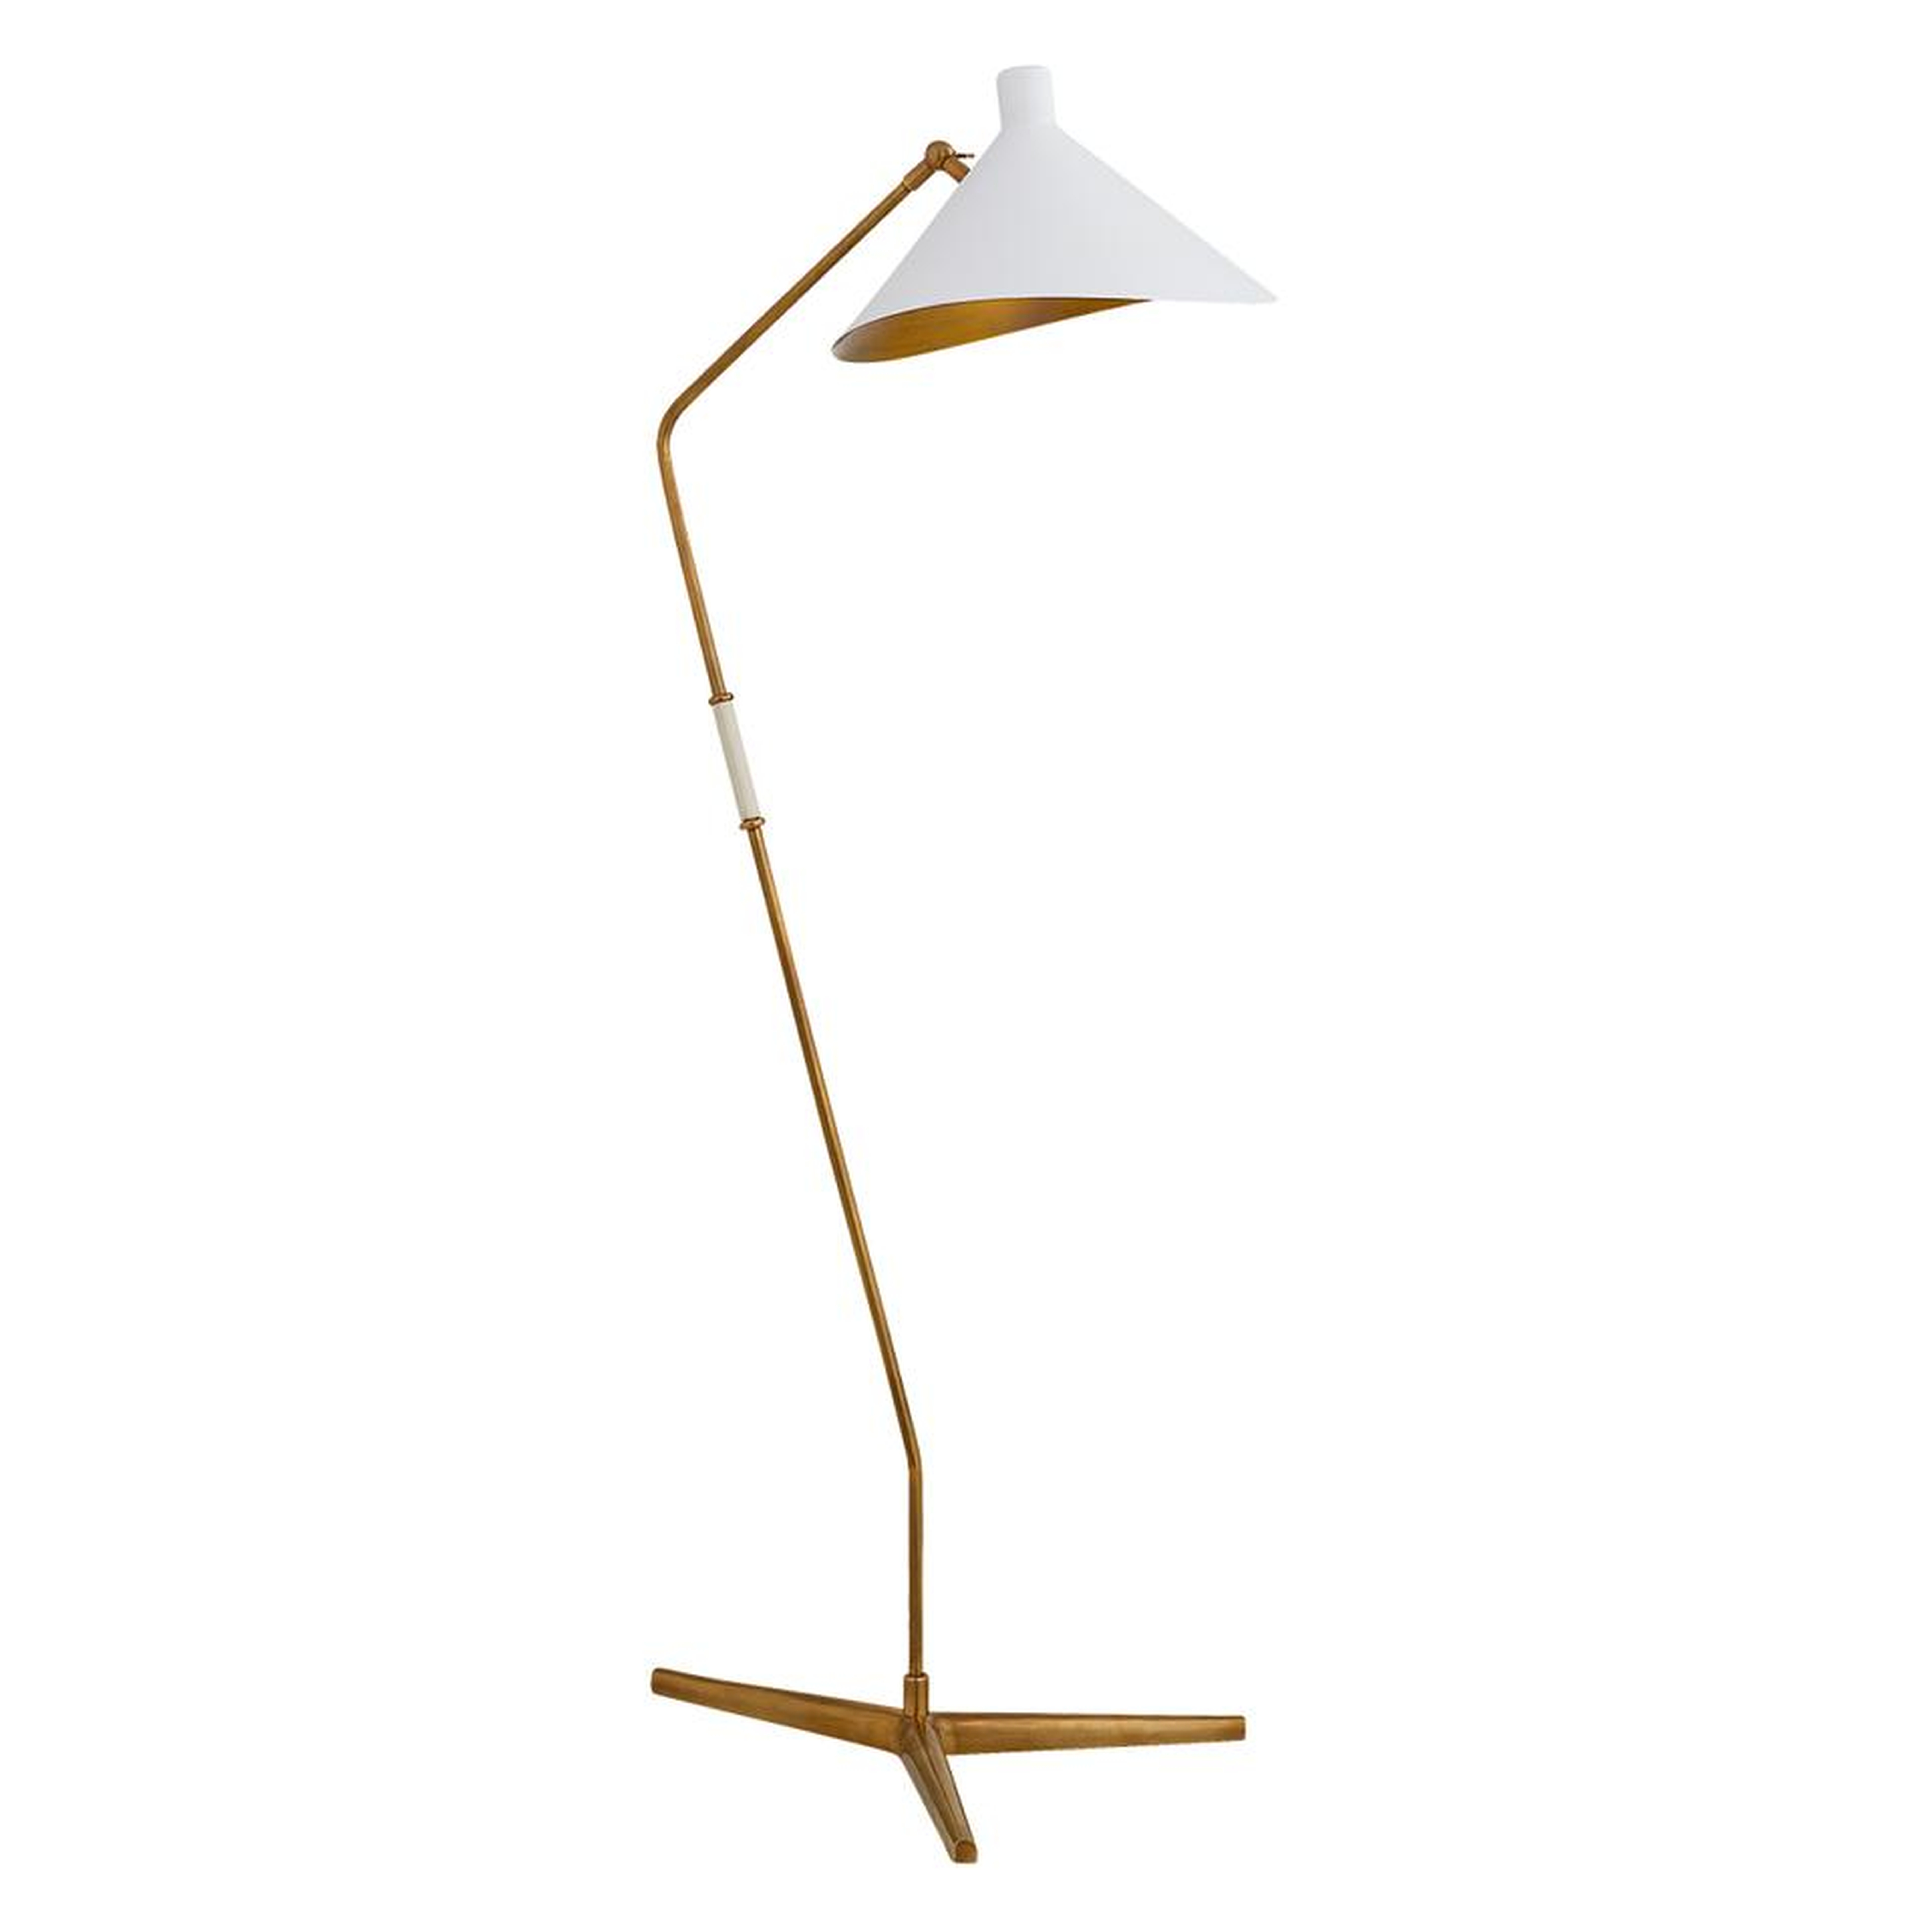 MAYOTTE OFFSET FLOOR LAMP - WHITE - McGee & Co.